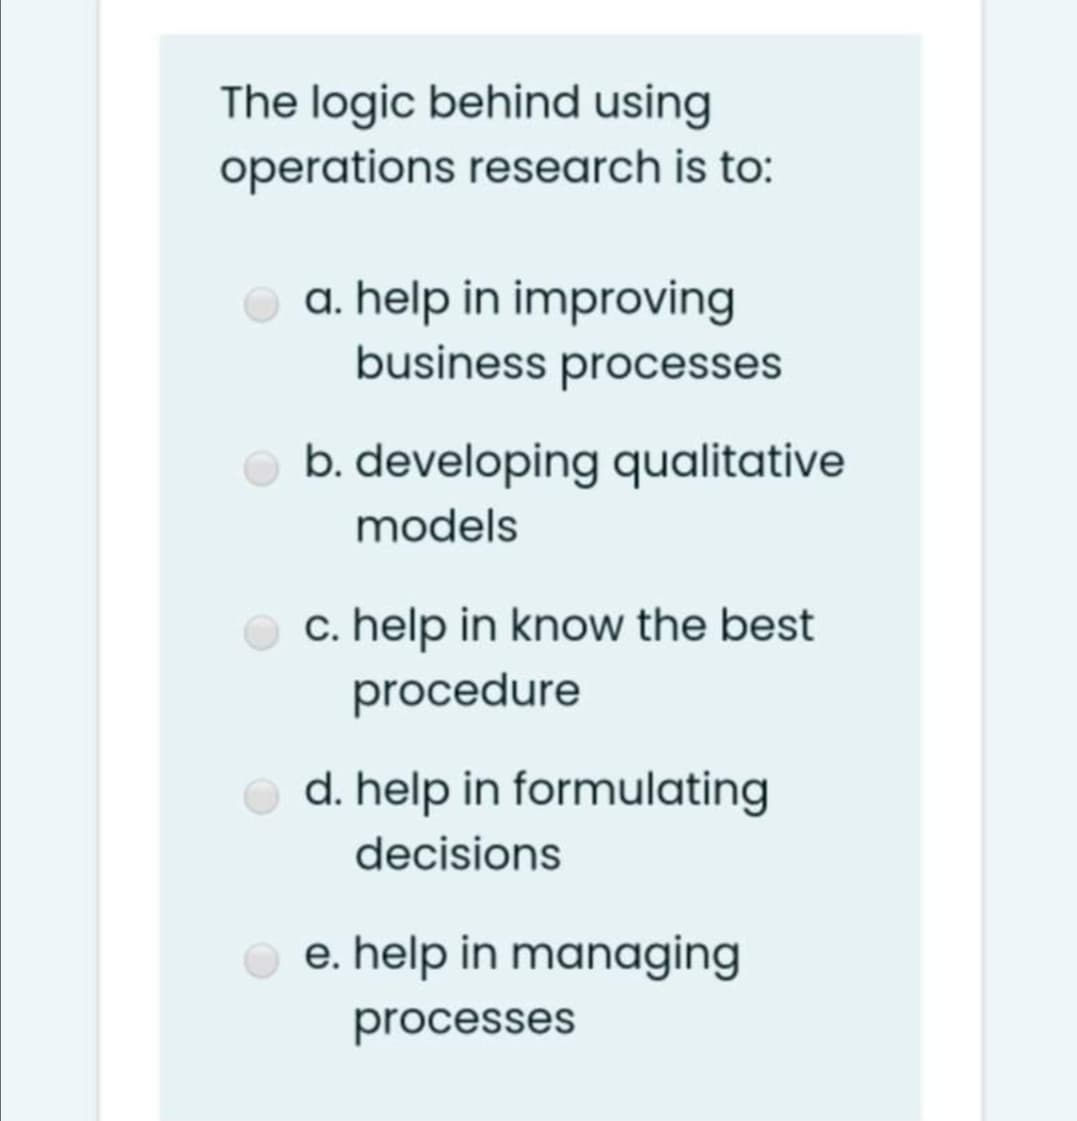 The logic behind using
operations research is to:
a. help in improving
business processes
b. developing qualitative
models
c. help in know the best
procedure
d. help in formulating
decisions
e. help in managing
processes
